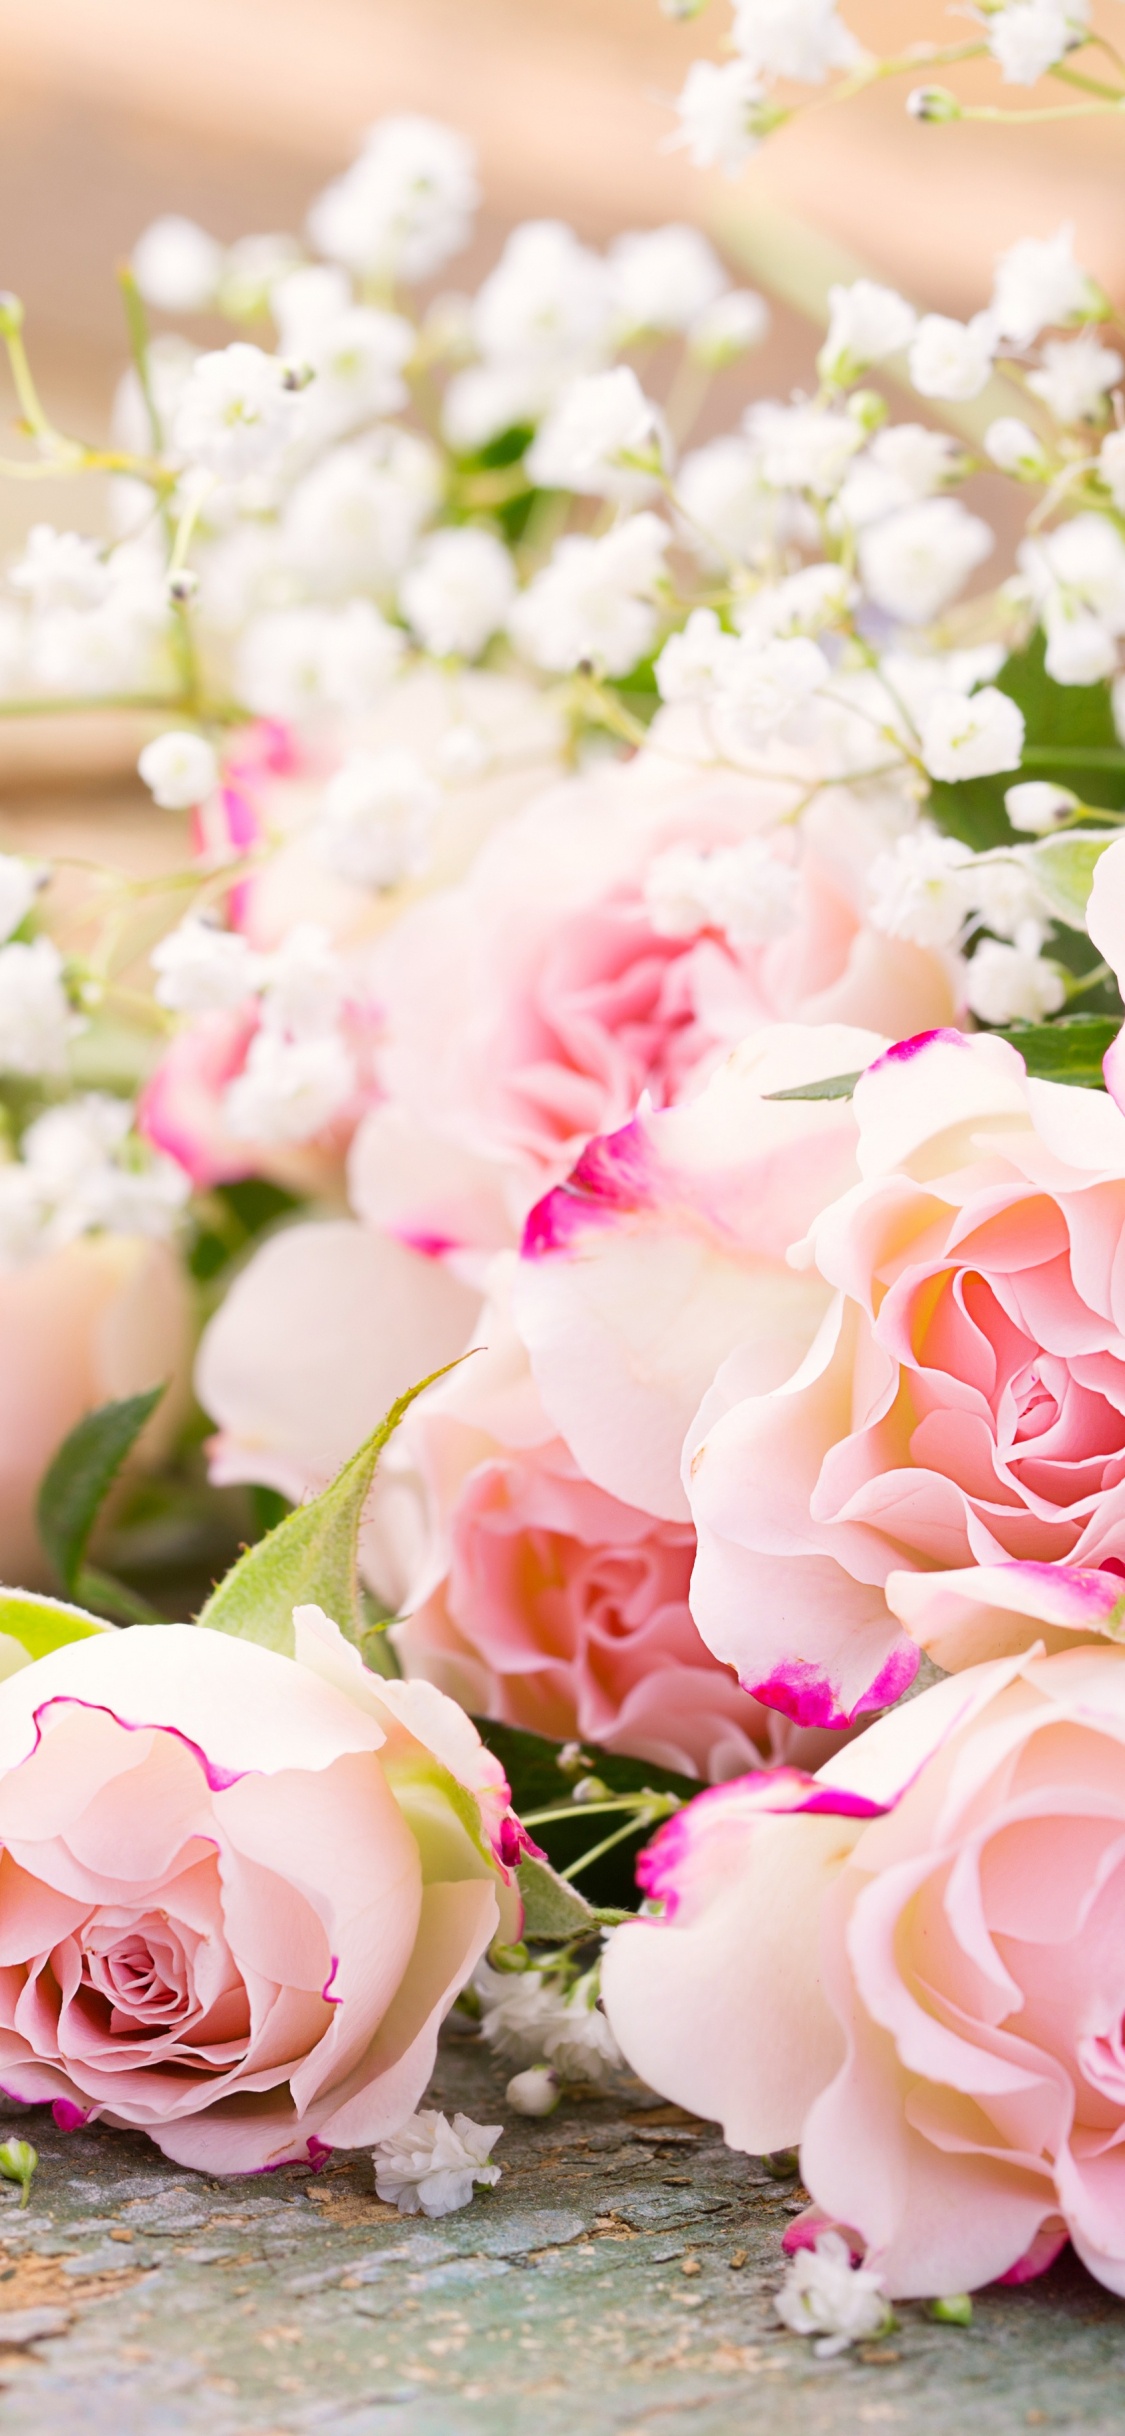 Pink and White Roses Bouquet. Wallpaper in 1125x2436 Resolution